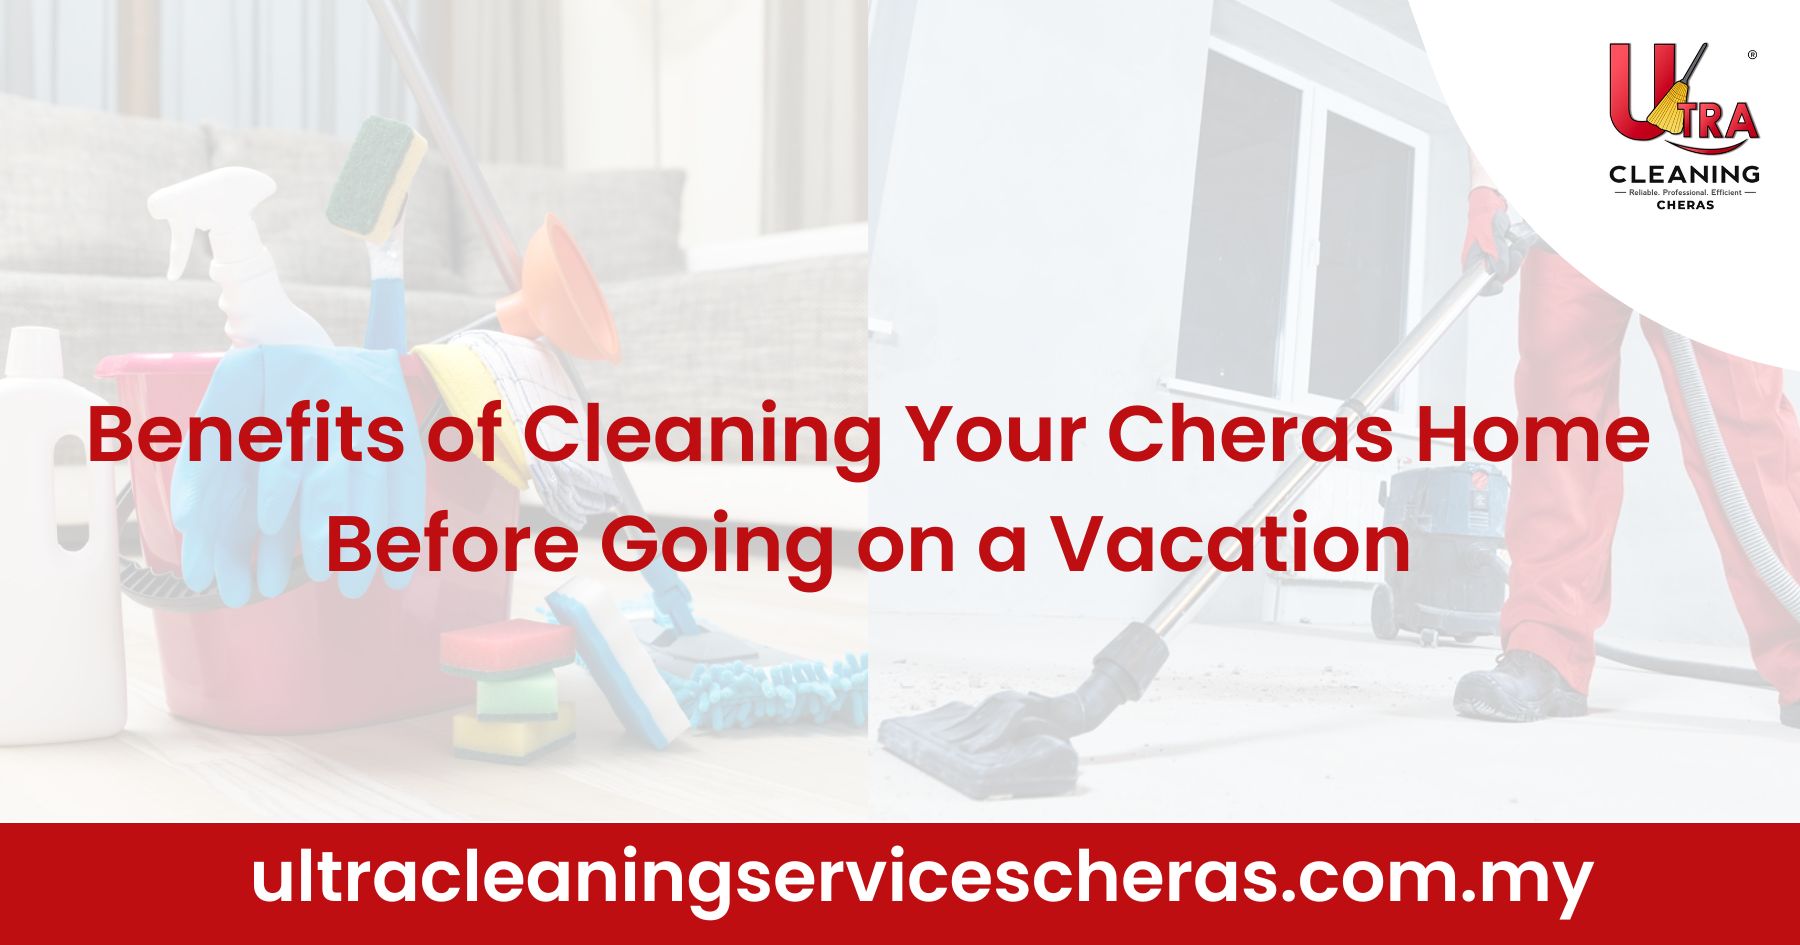 Benefits of Cleaning Cheras Home Before Going on a Vacation